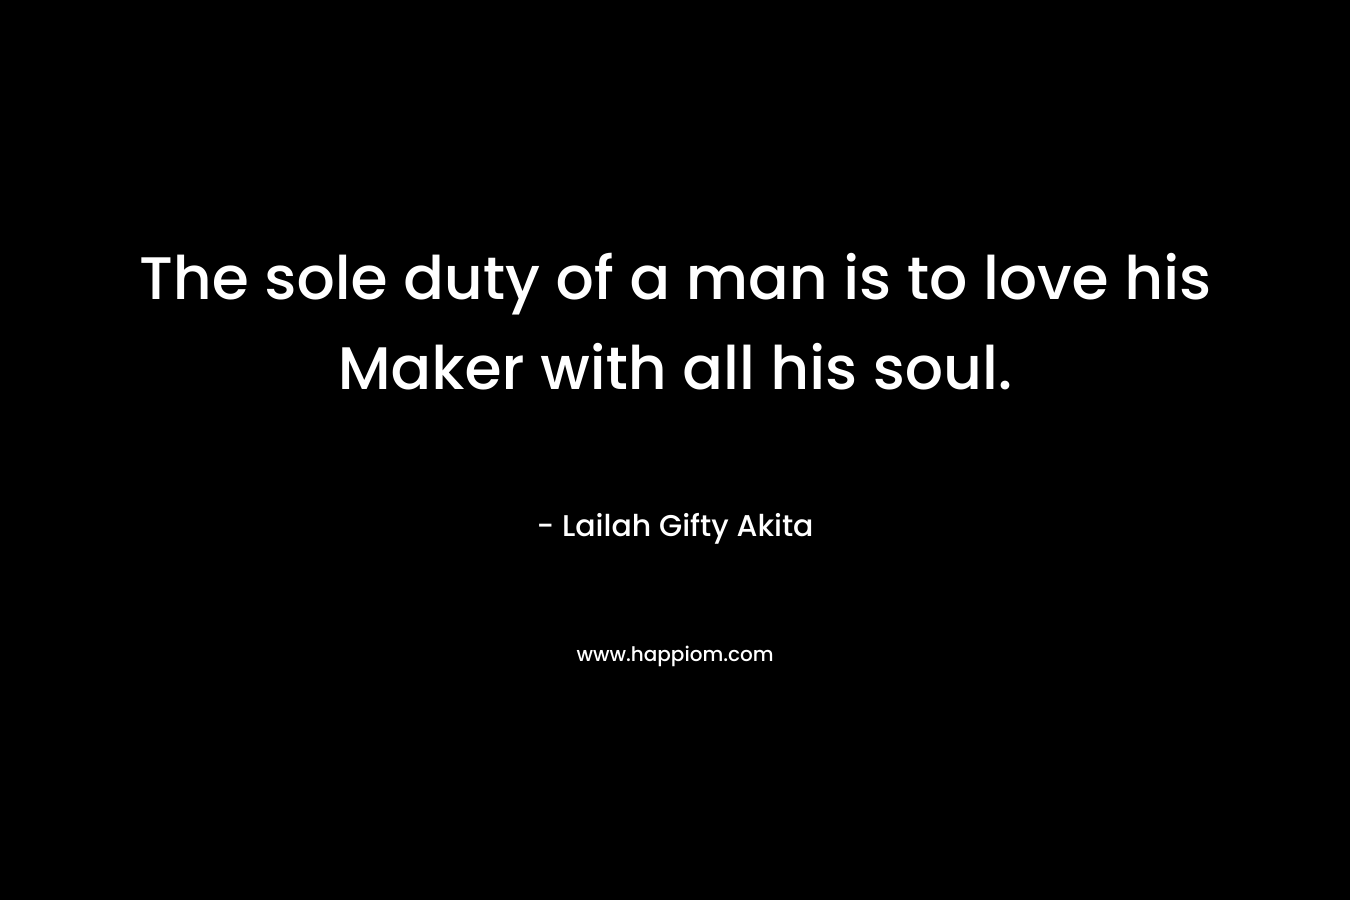 The sole duty of a man is to love his Maker with all his soul.